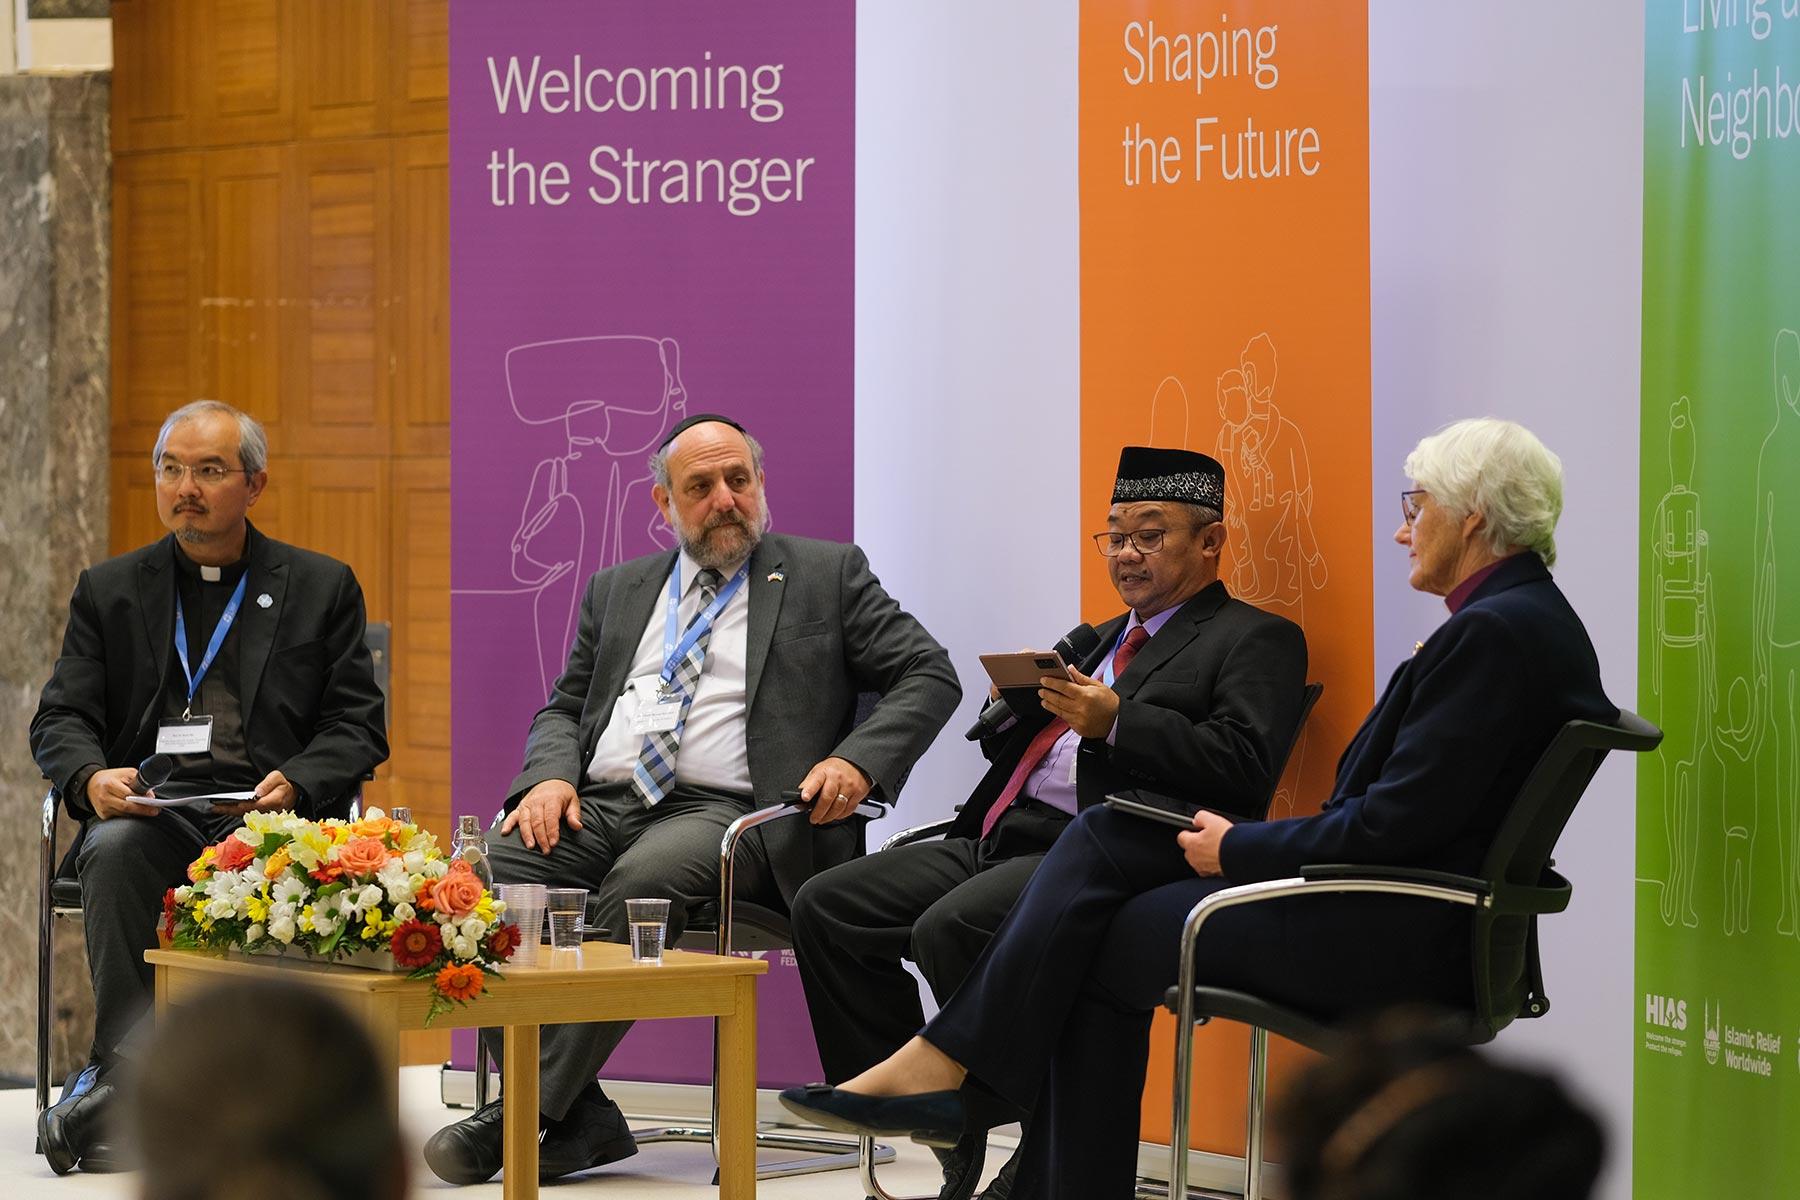 Religious leaders at Welcoming the Stranger conference